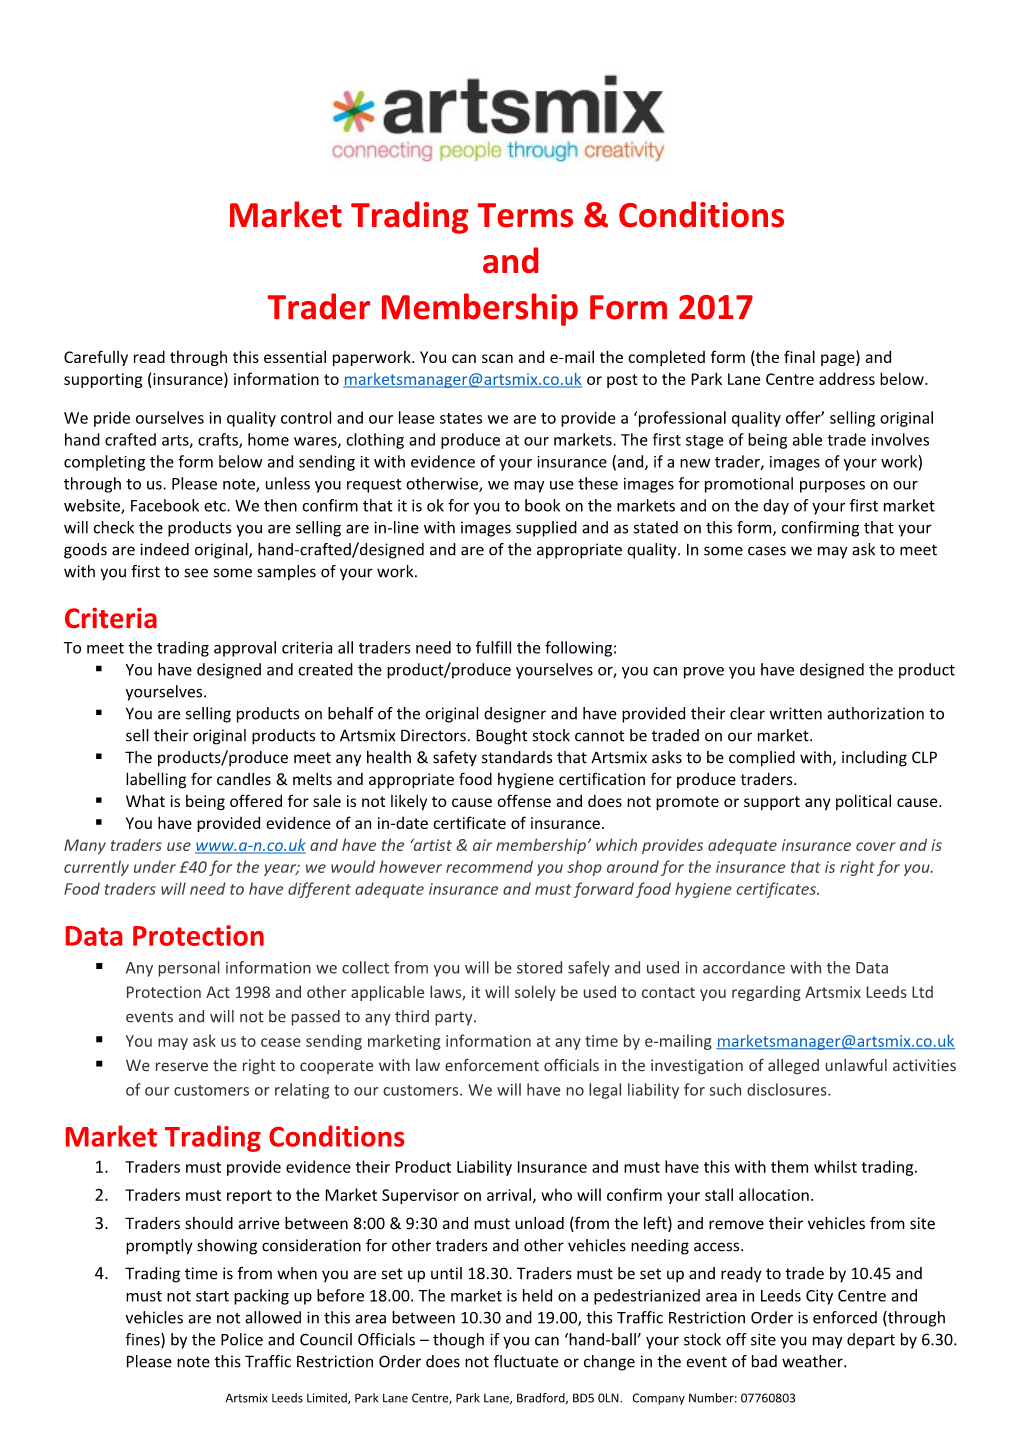 Market Trading Terms & Conditions